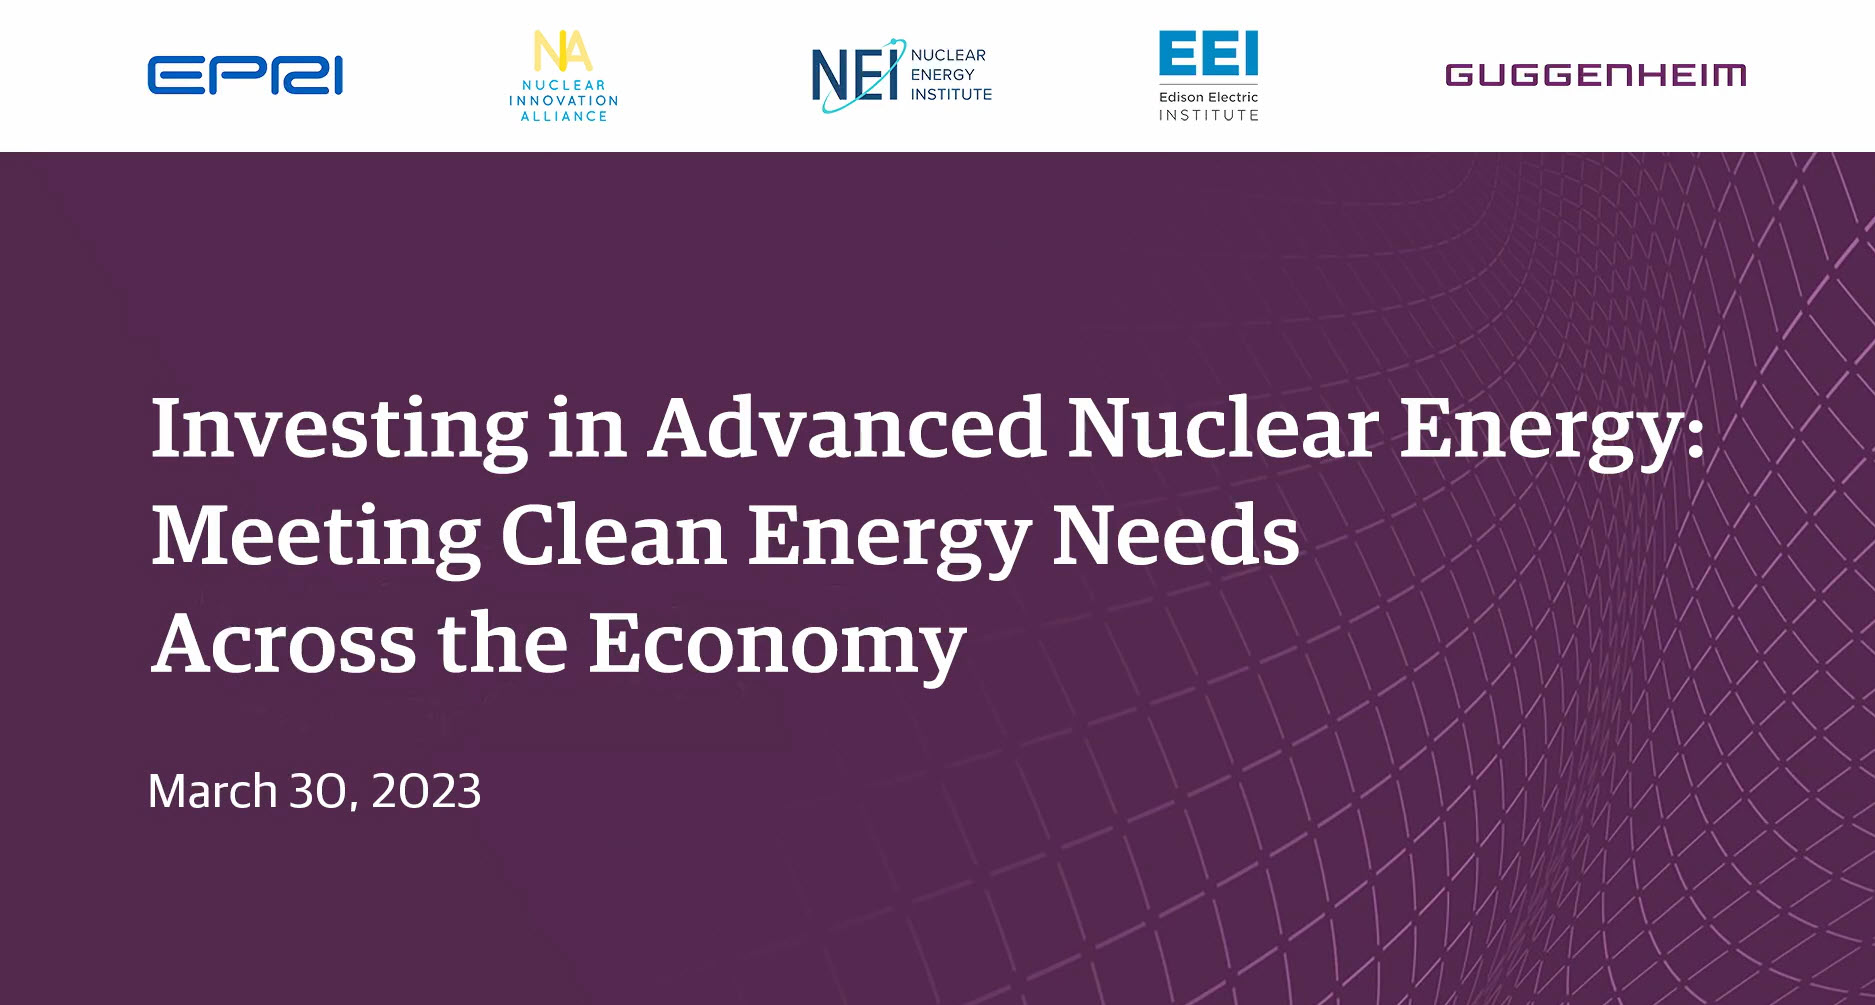 Investing in Advanced Nuclear Energy: Meeting Clean Energy Needs Across the Economy